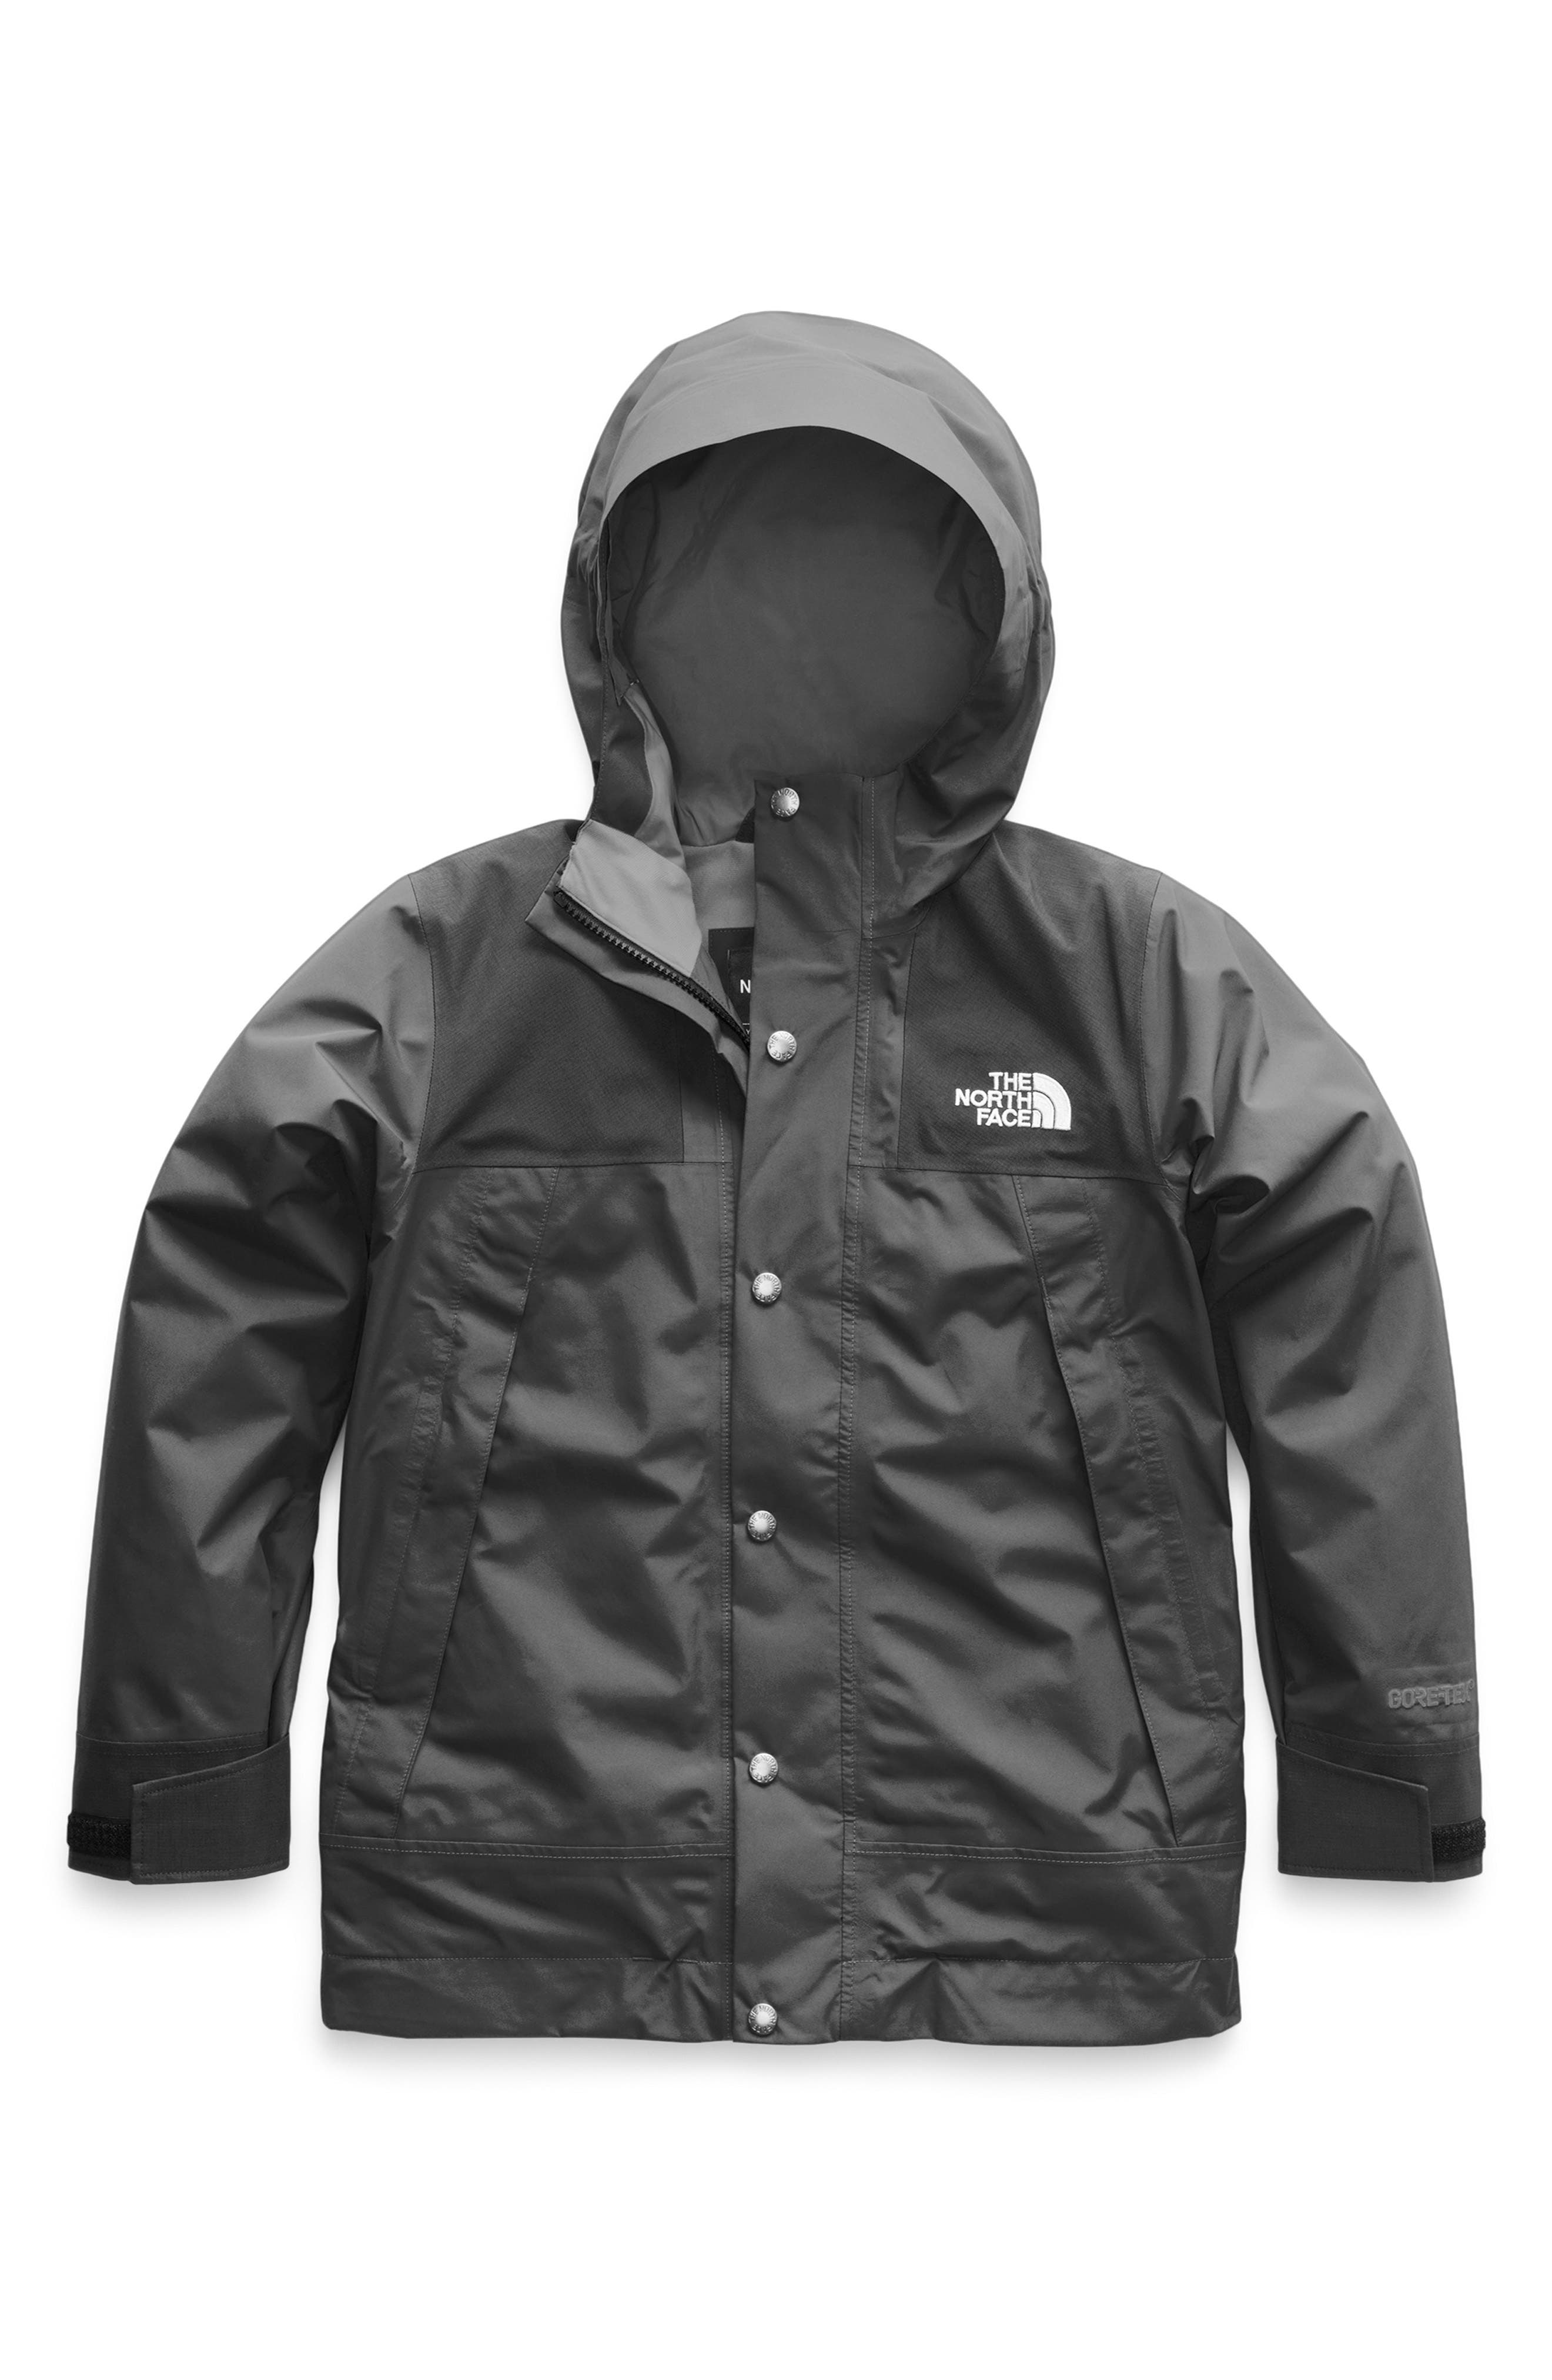 The North Face Kids' Mountain Gore-Tex 